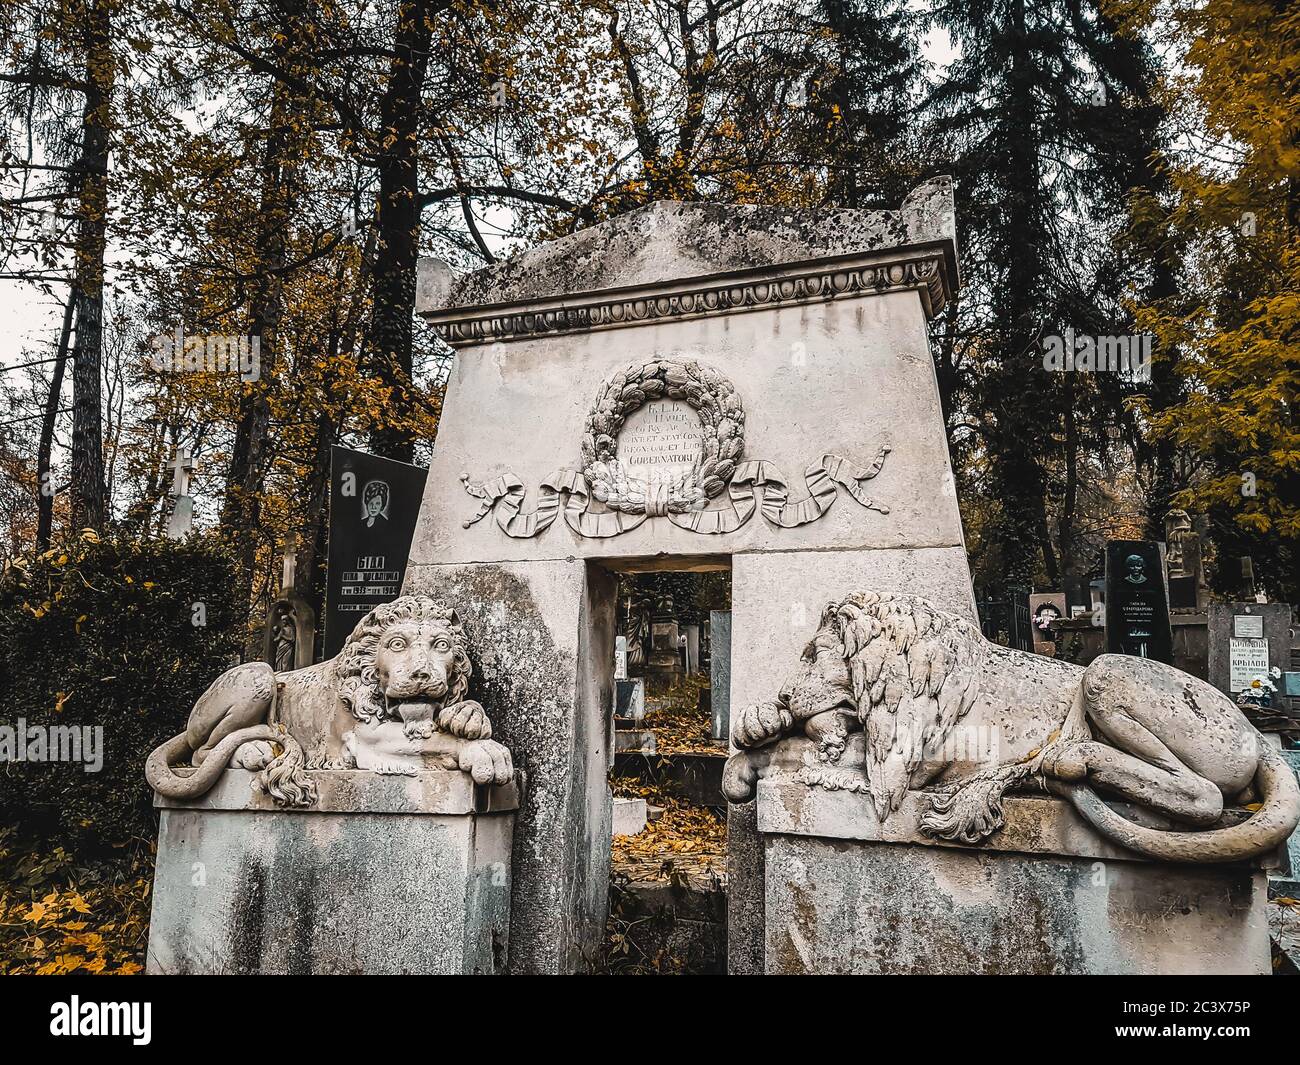 Lviv / Ukraine - November 2019: Tombstone and lion sculptures in a crypt outdoor at Lychakiv cemetery. Famous old graveyard in eastern Europe. Stock Photo